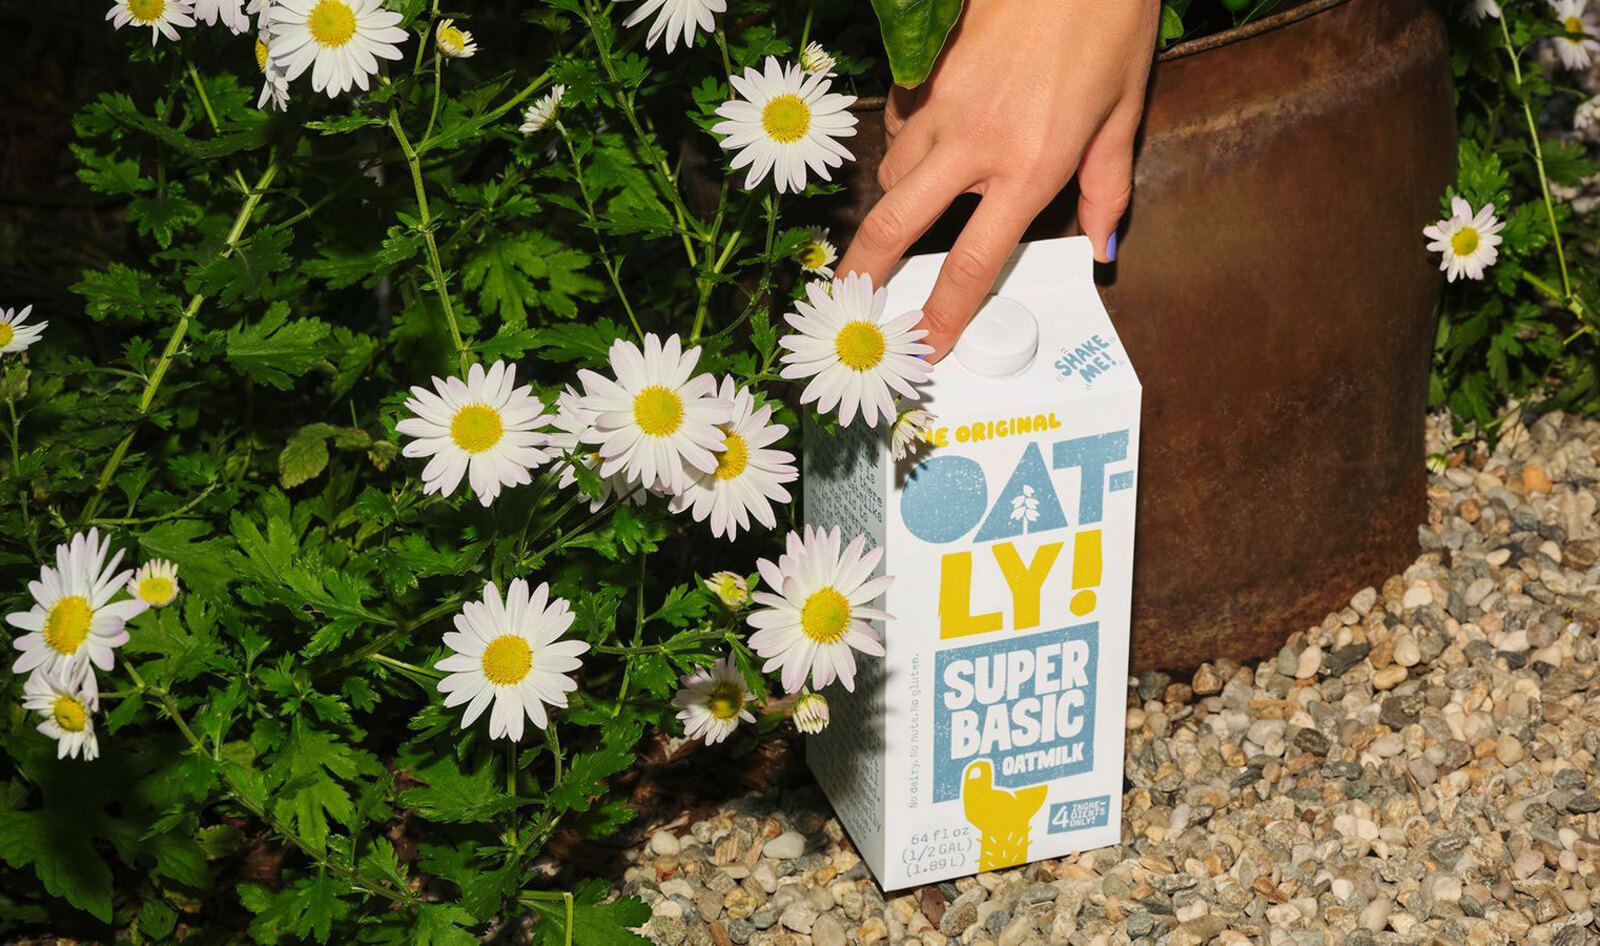 Oatly Joins Califia Farms, Silk, And Ripple To Blow Up The $7.4 Billion Unsweetened Vegan Milk Category